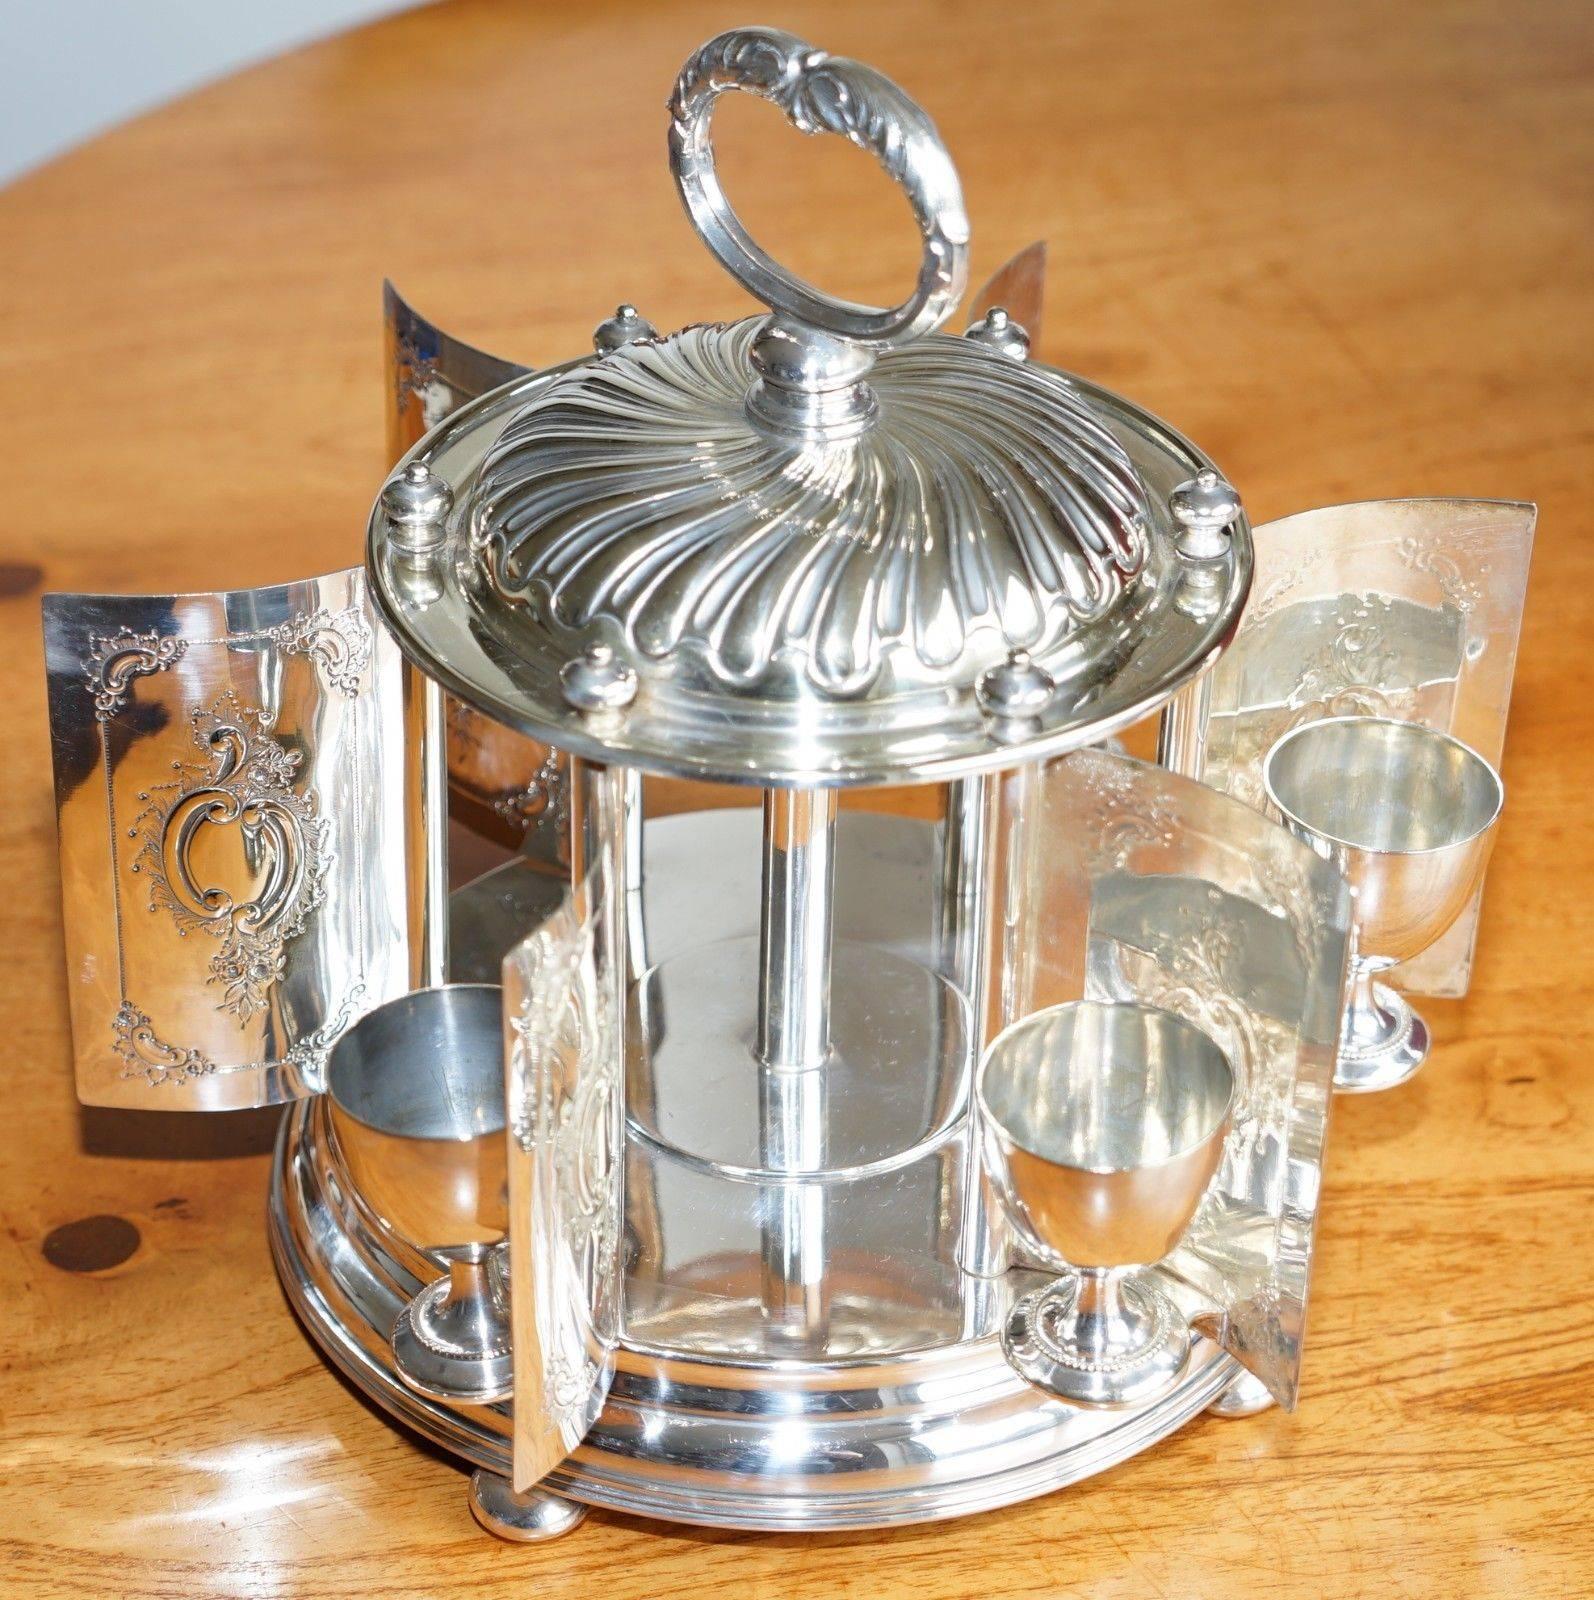 We are delighted to offer for sale for exceptionally rare solid Princess Plate Mappin & Webb cruet set / hardboiled egg decanter

A very rare find, Princess plated items are highly prized, expertly crafted and in high demand, this piece is fully